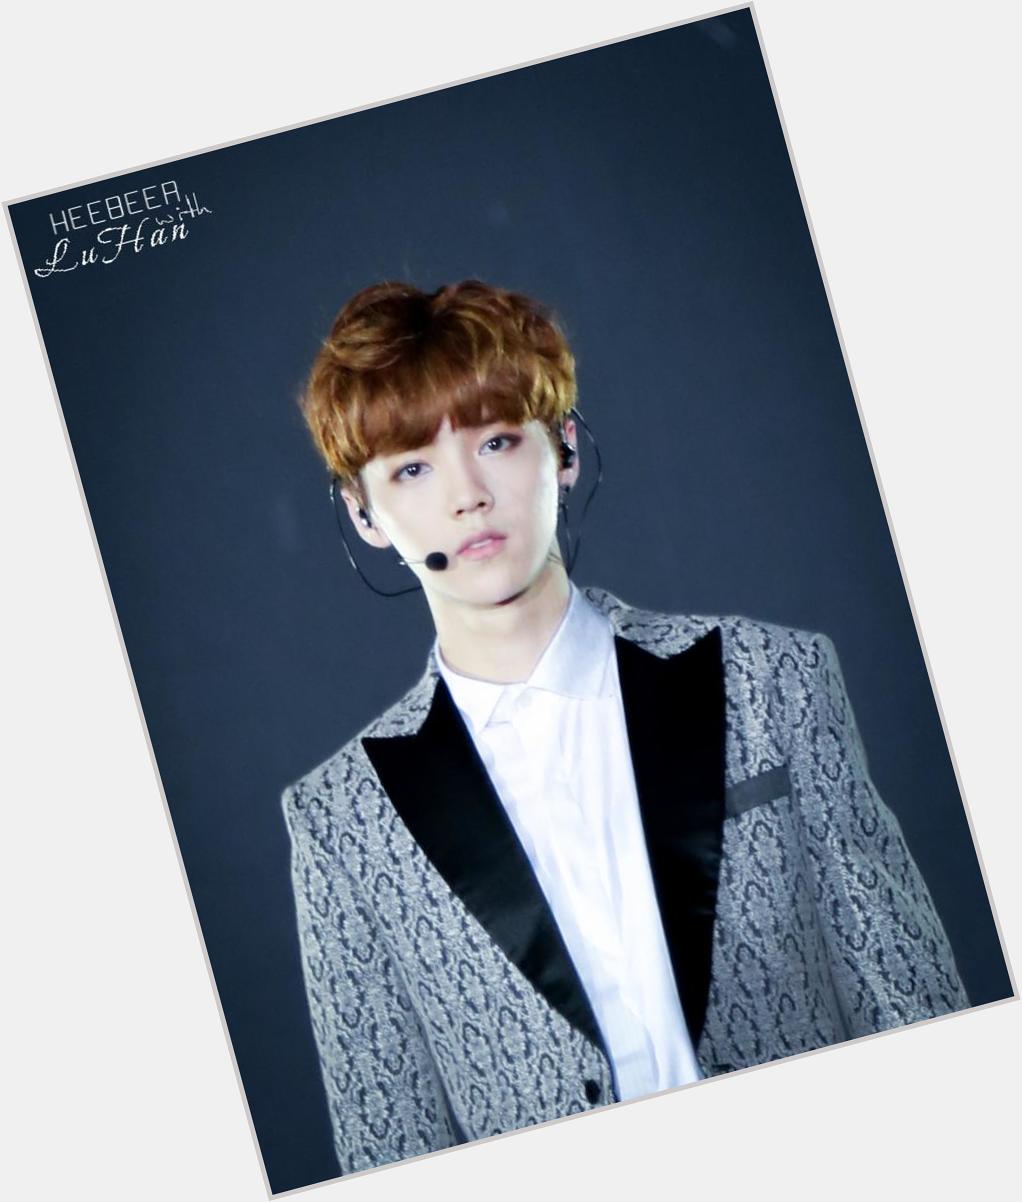 The one who has the most fangirls,
happy 25th birthday to our lu han   